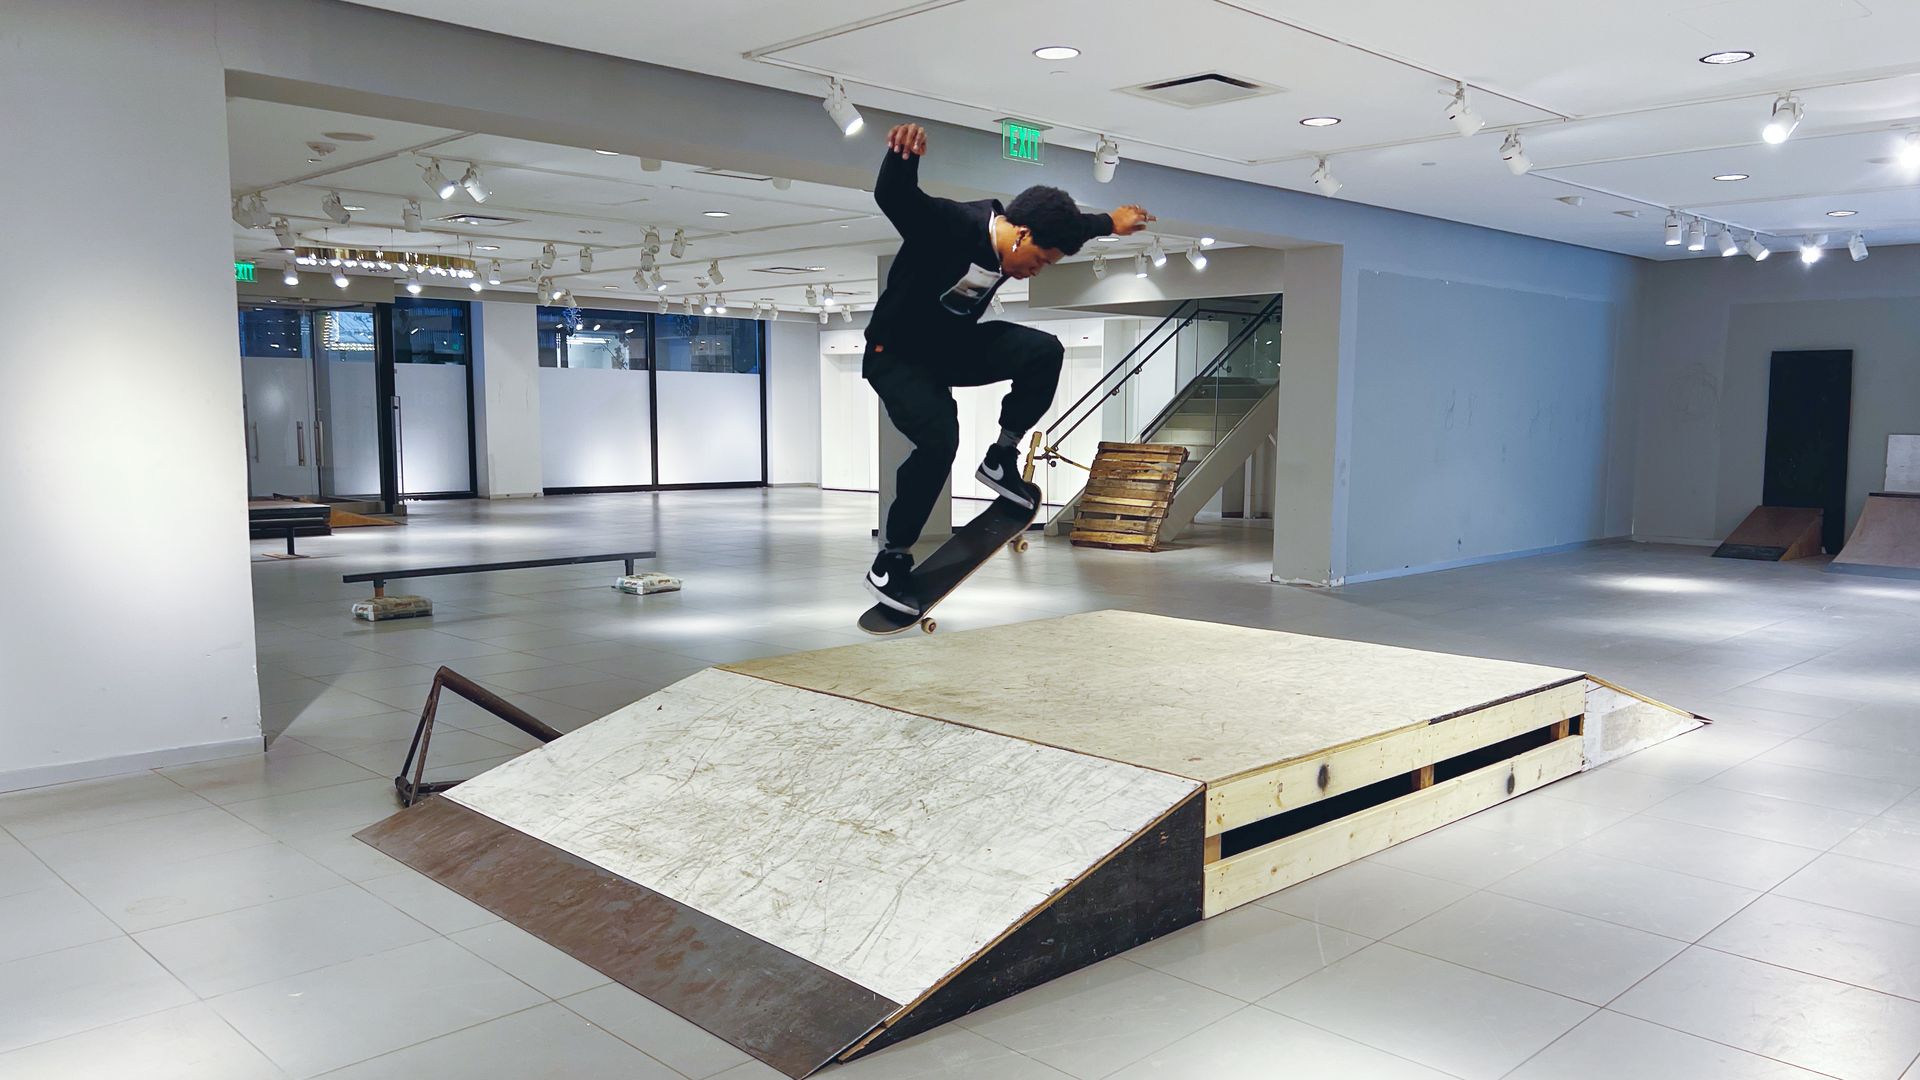 A skateboarder does a trick on a ramp in a vacant store.